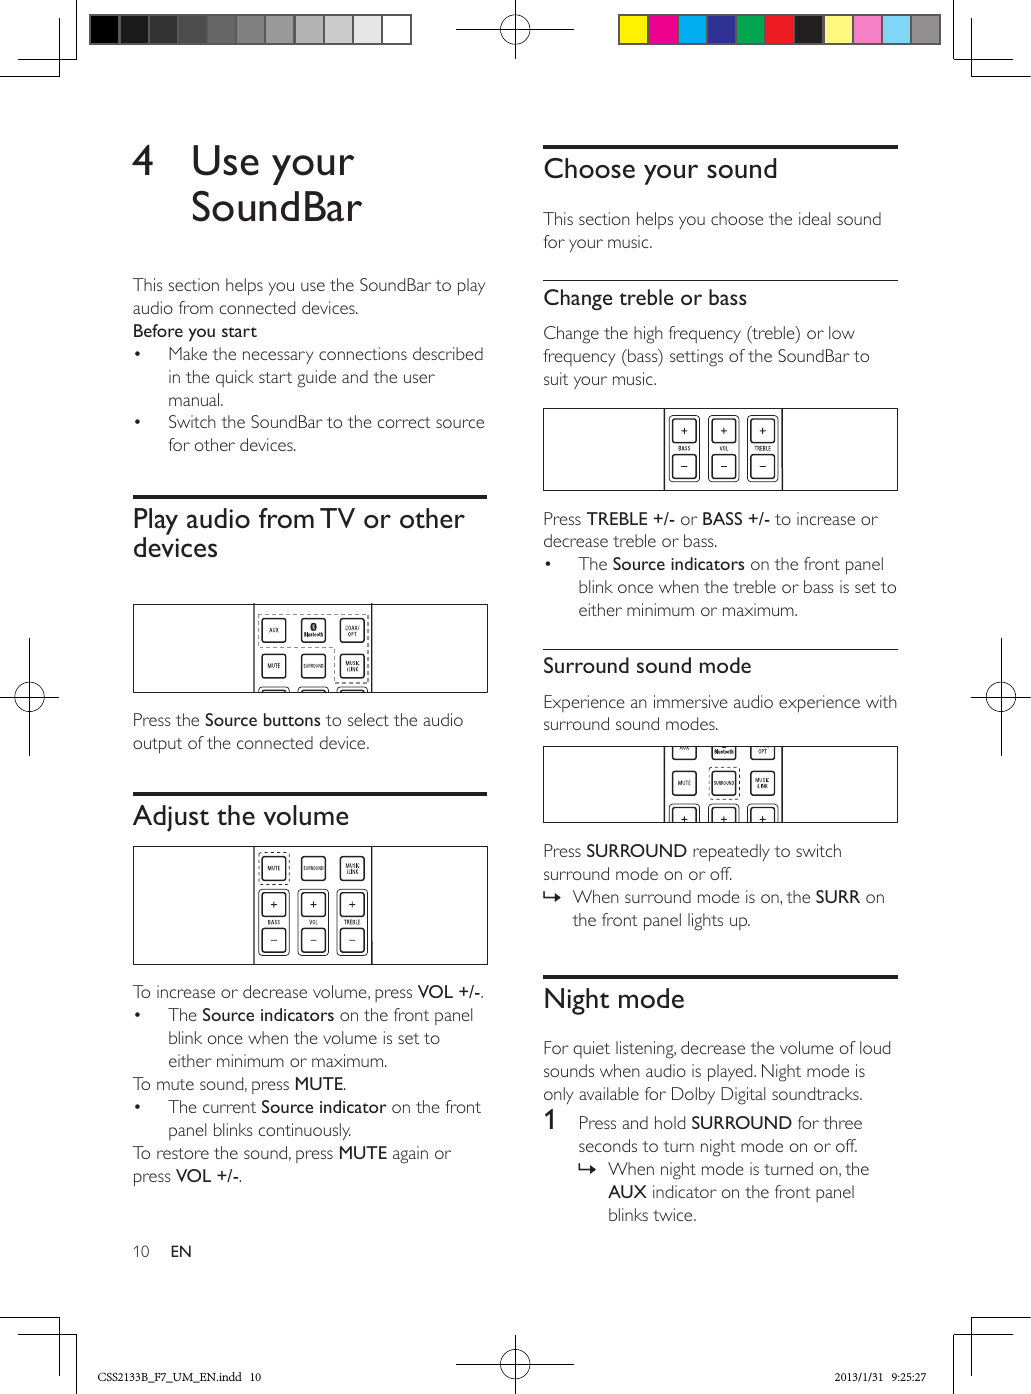 10 EN4  Use your SoundBarThis section helps you use the SoundBar to play audio from connected devices.Before you start•  Make the necessary connections described in the quick start guide and the user manual.•  Switch the SoundBar to the correct source for other devices.Play audio from TV or other devices  Press the Source buttons to select the audio output of the connected device.Adjust the volume  To increase or decrease volume, press VOL +/-.•  The Source indicators on the front panel blink once when the volume is set to either minimum or maximum.To mute sound, press MUTE.•  The current Source indicator on the front panel blinks continuously.To restore the sound, press MUTE again or press VOL +/-.Choose your soundThis section helps you choose the ideal sound for your music.Change treble or bassChange the high frequency (treble) or low frequency (bass) settings of the SoundBar to suit your music.  Press TREBLE +/- or BASS +/- to increase or decrease treble or bass.•  The Source indicators on the front panel blink once when the treble or bass is set to either minimum or maximum.Surround sound modeExperience an immersive audio experience with surround sound modes.  Press SURROUND repeatedly to switch surround mode on or off.  » When surround mode is on, the SURR on the front panel lights up.Night modeFor quiet listening, decrease the volume of loud sounds when audio is played. Night mode is only available for Dolby Digital soundtracks. 1  Press and hold SURROUND for three seconds to turn night mode on or off. » When night mode is turned on, the AUX indicator on the front panel blinks twice.CSS2133B_F7_UM_EN.indd   10 2013/1/31   9:25:27